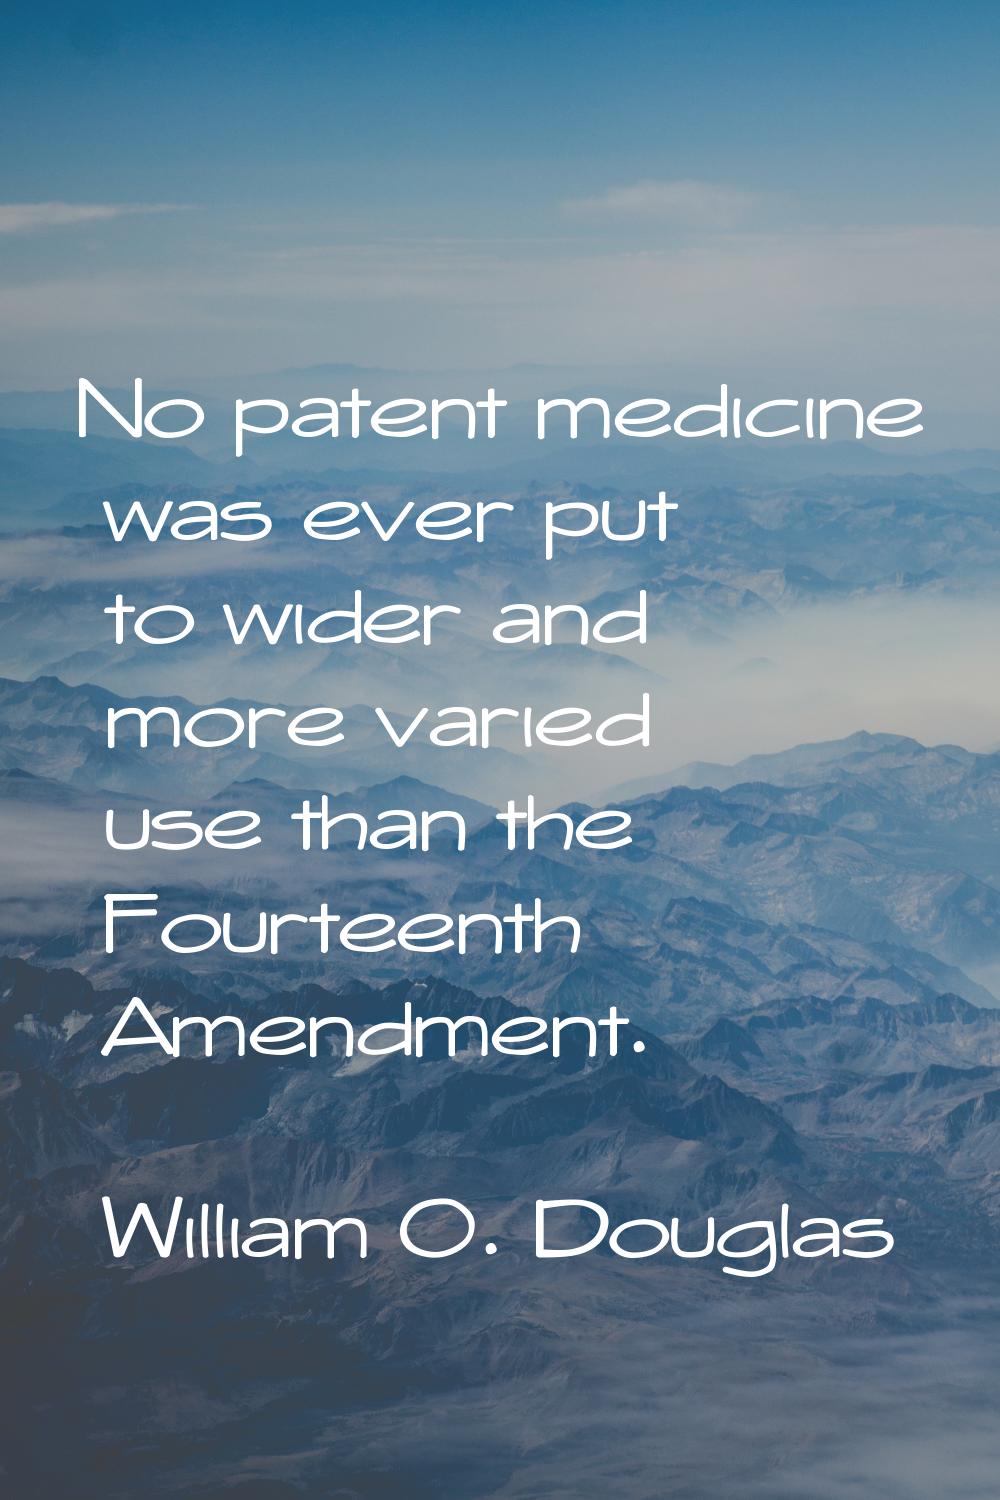 No patent medicine was ever put to wider and more varied use than the Fourteenth Amendment.